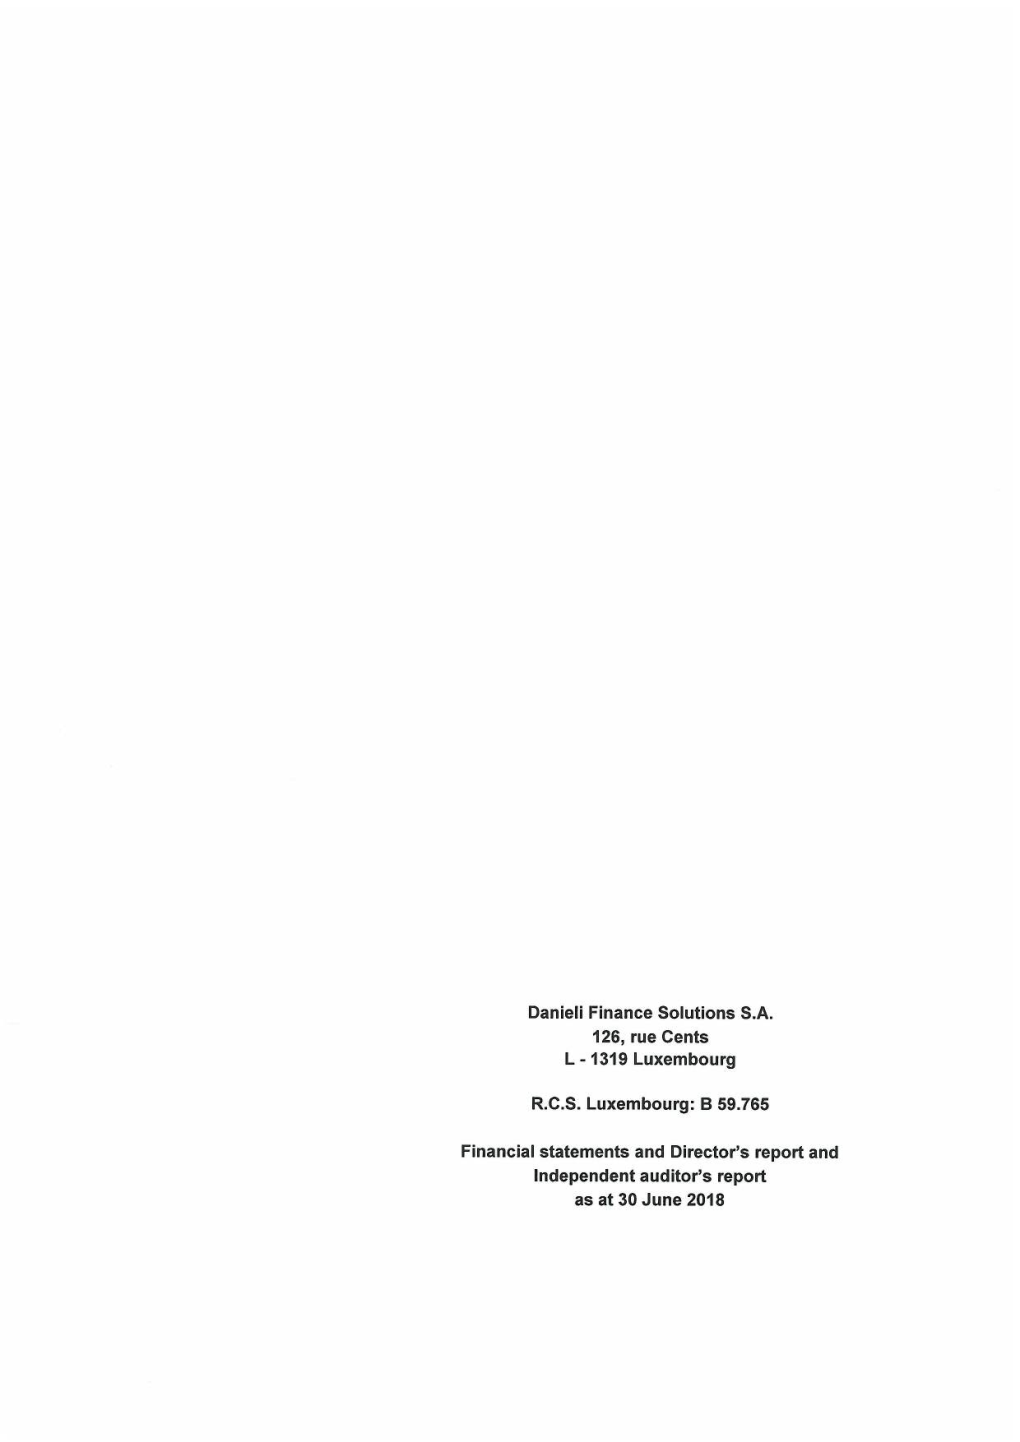 B 59.765 Financial Statements and Director